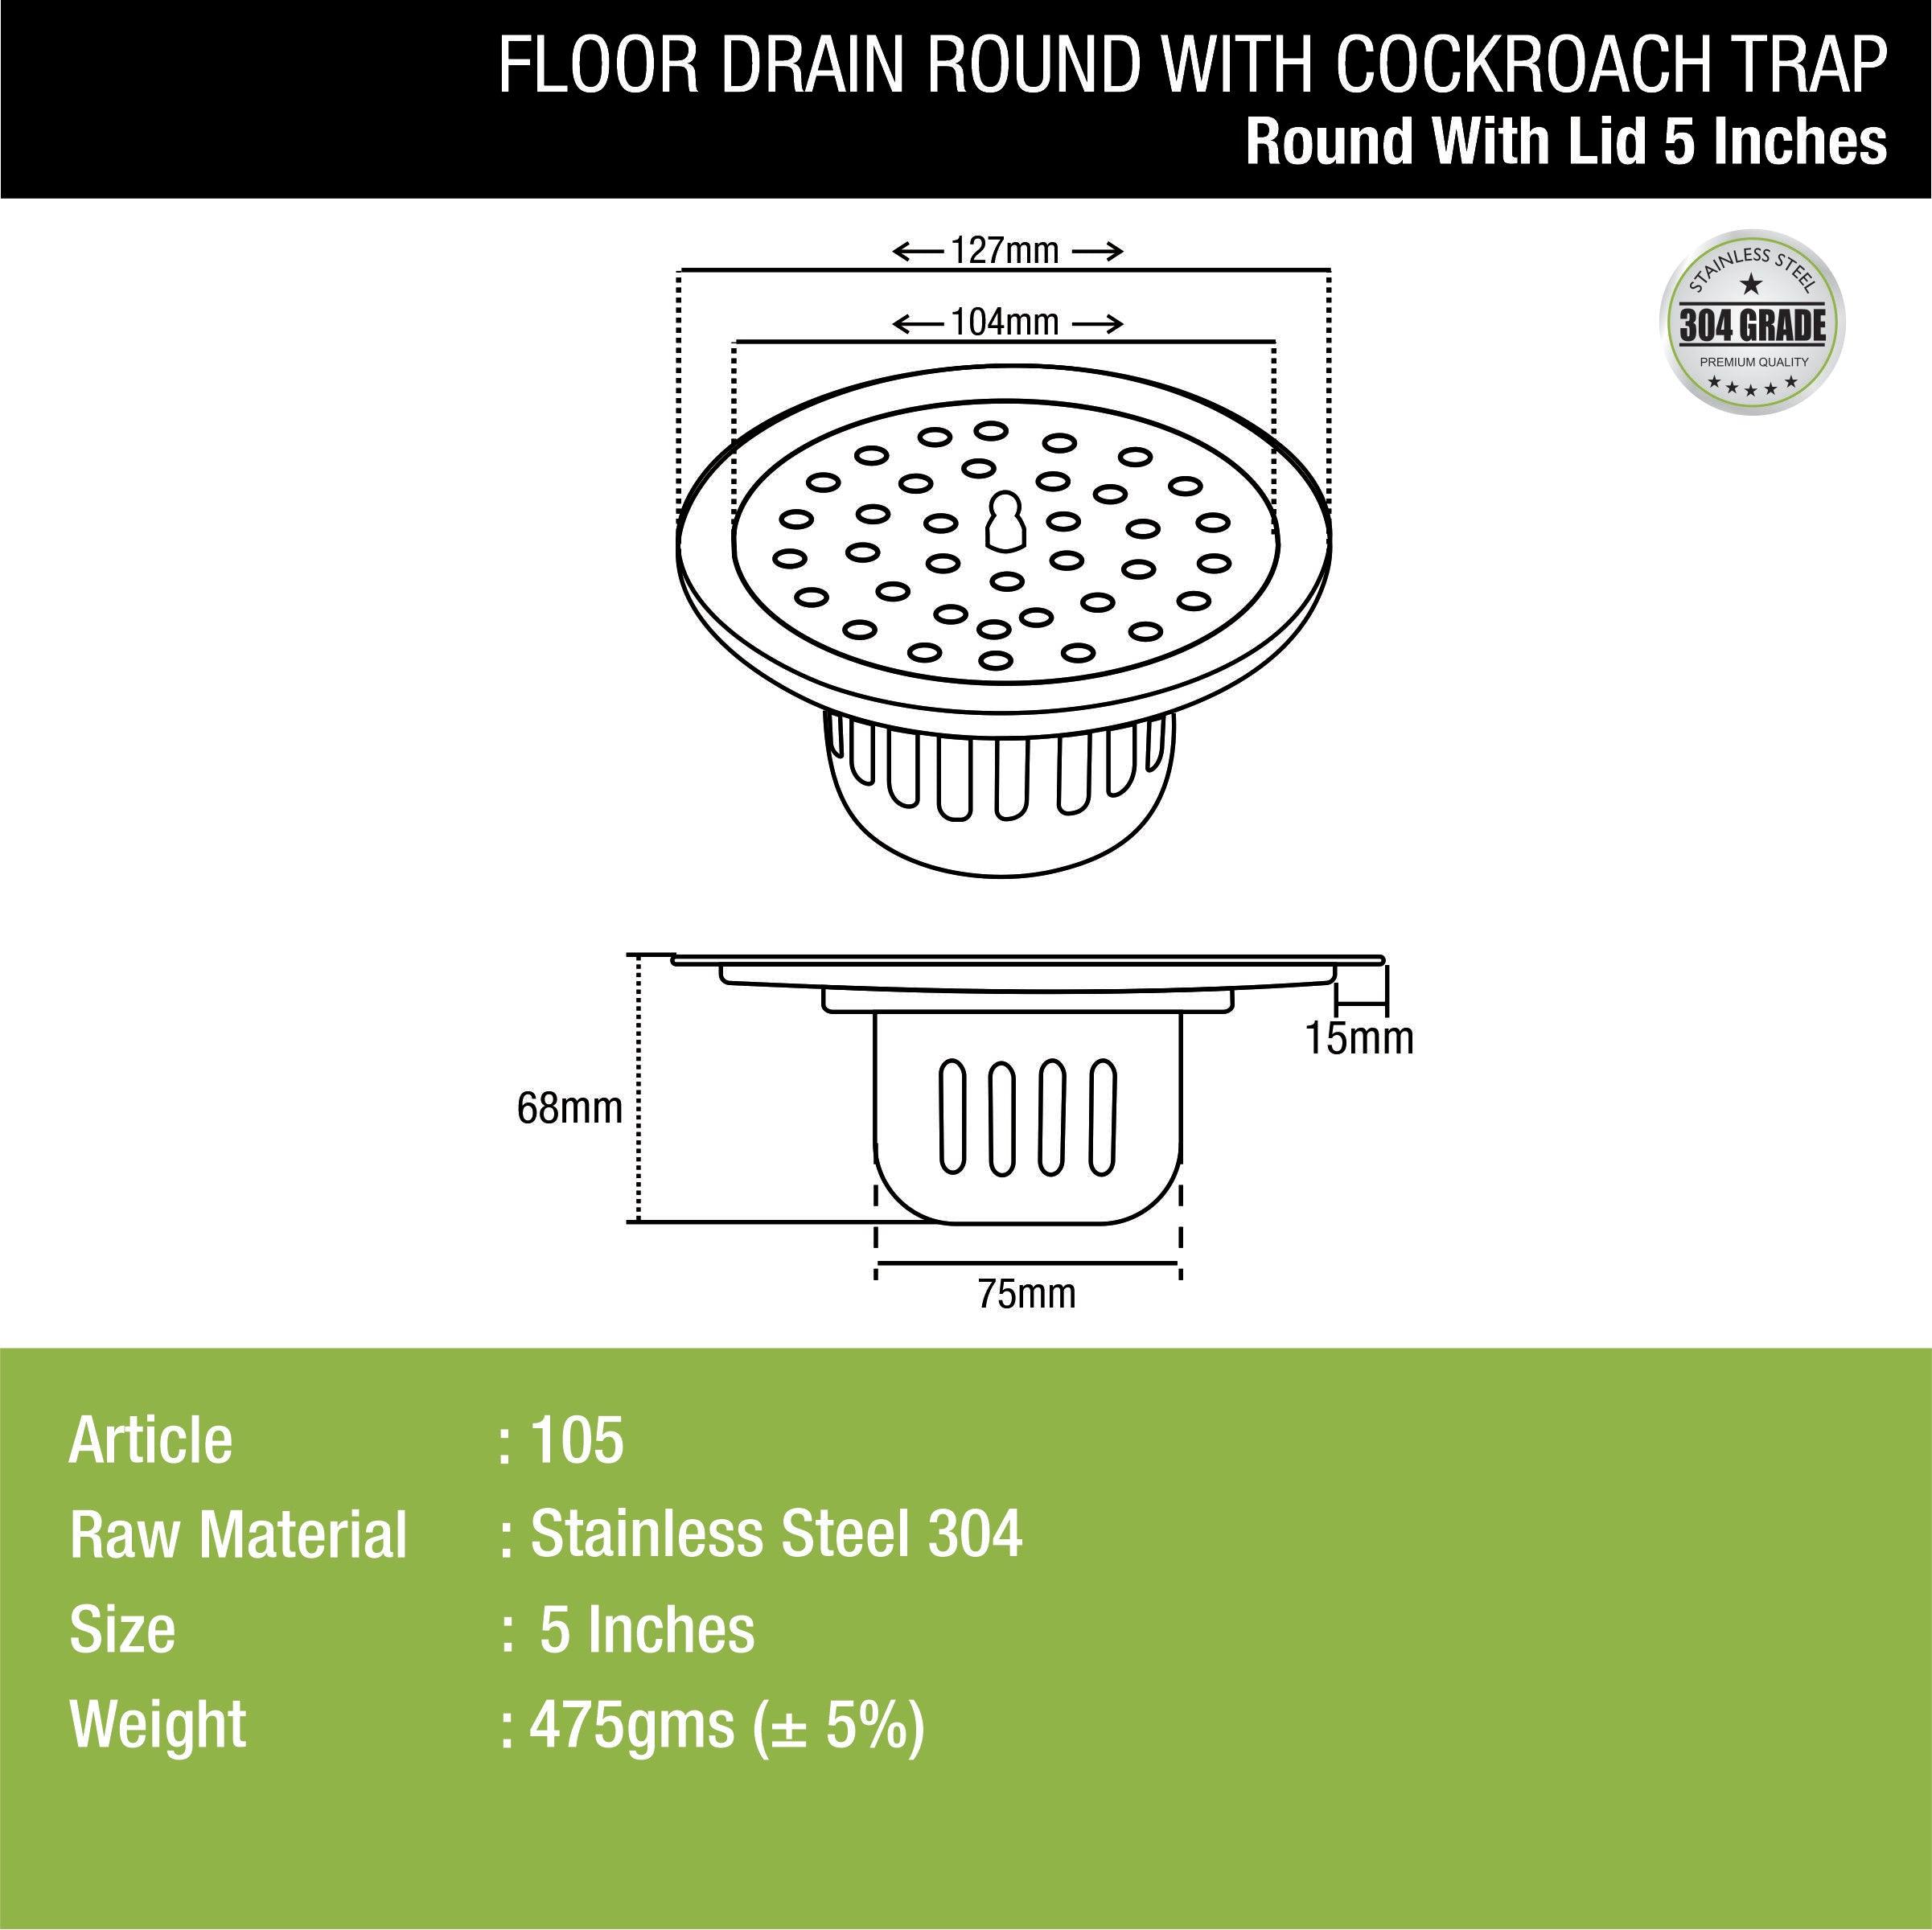 Round Floor Drain (5 inches) with Cockroach Trap & Lid dimensions and sizes